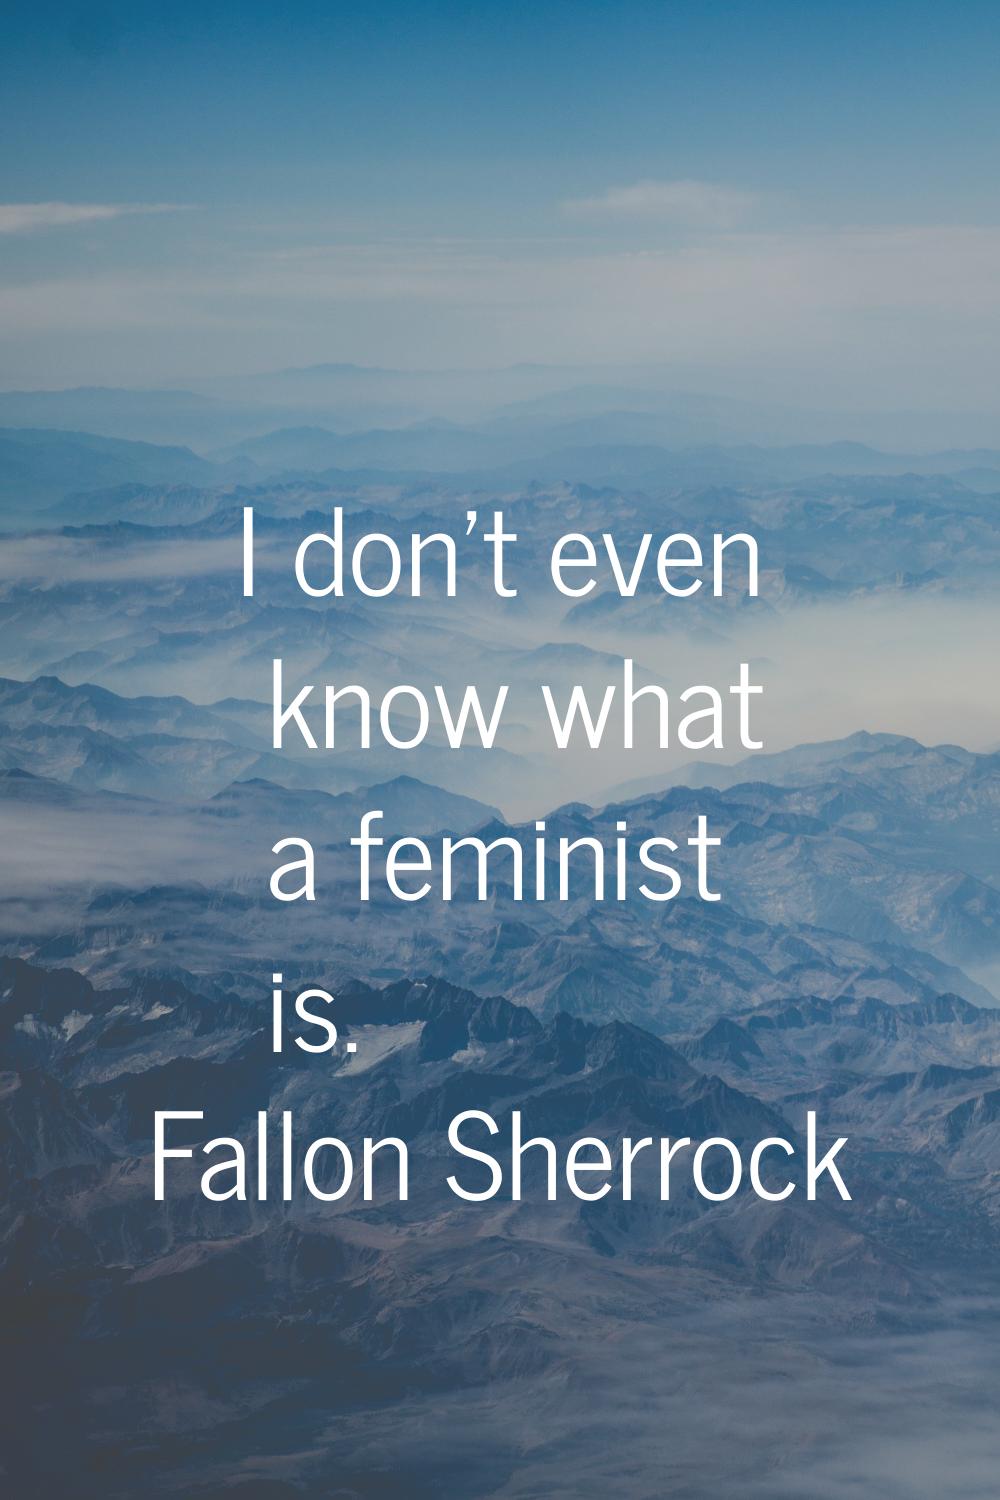 I don't even know what a feminist is.